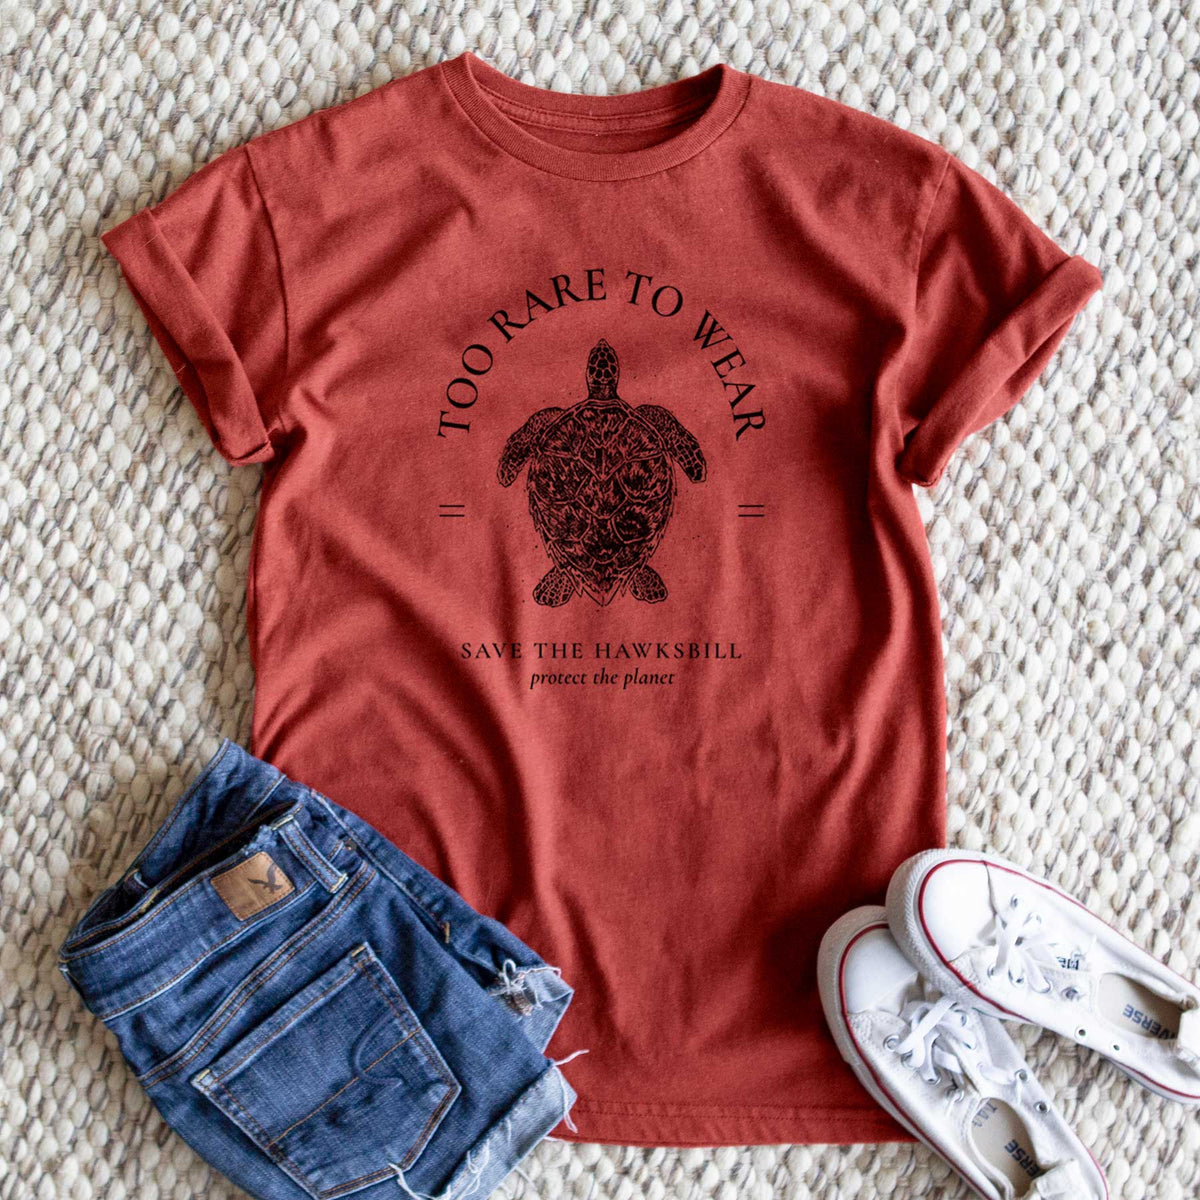 Too Rare to Wear - Save the Hawksbill - Unisex Recycled Eco Tee  - CLOSEOUT - FINAL SALE